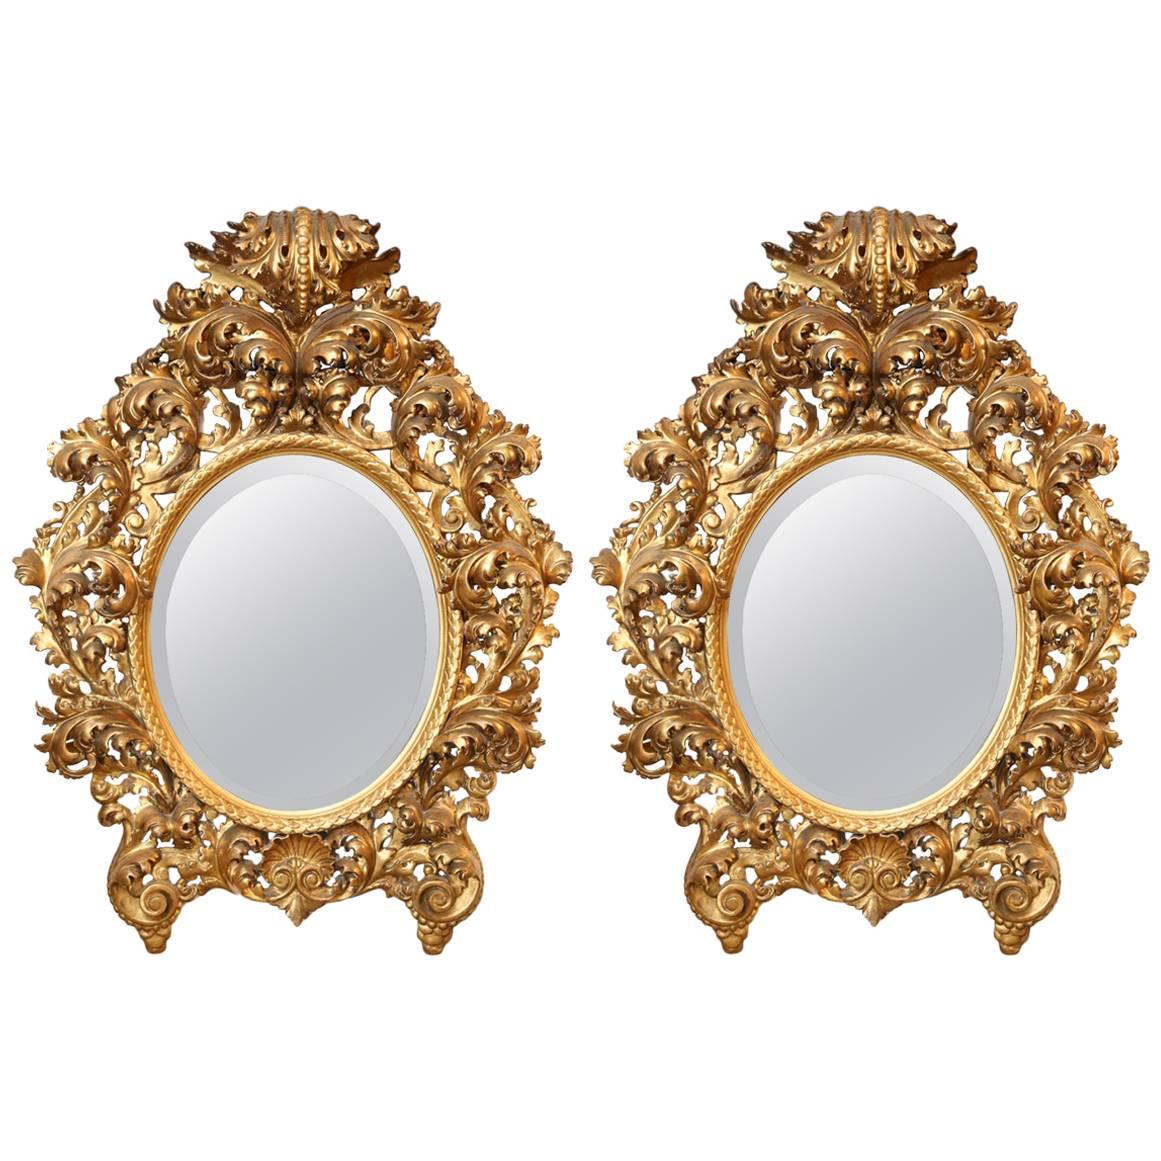 Pair of 18th Century Baroque Carved and Gilded Mirrors